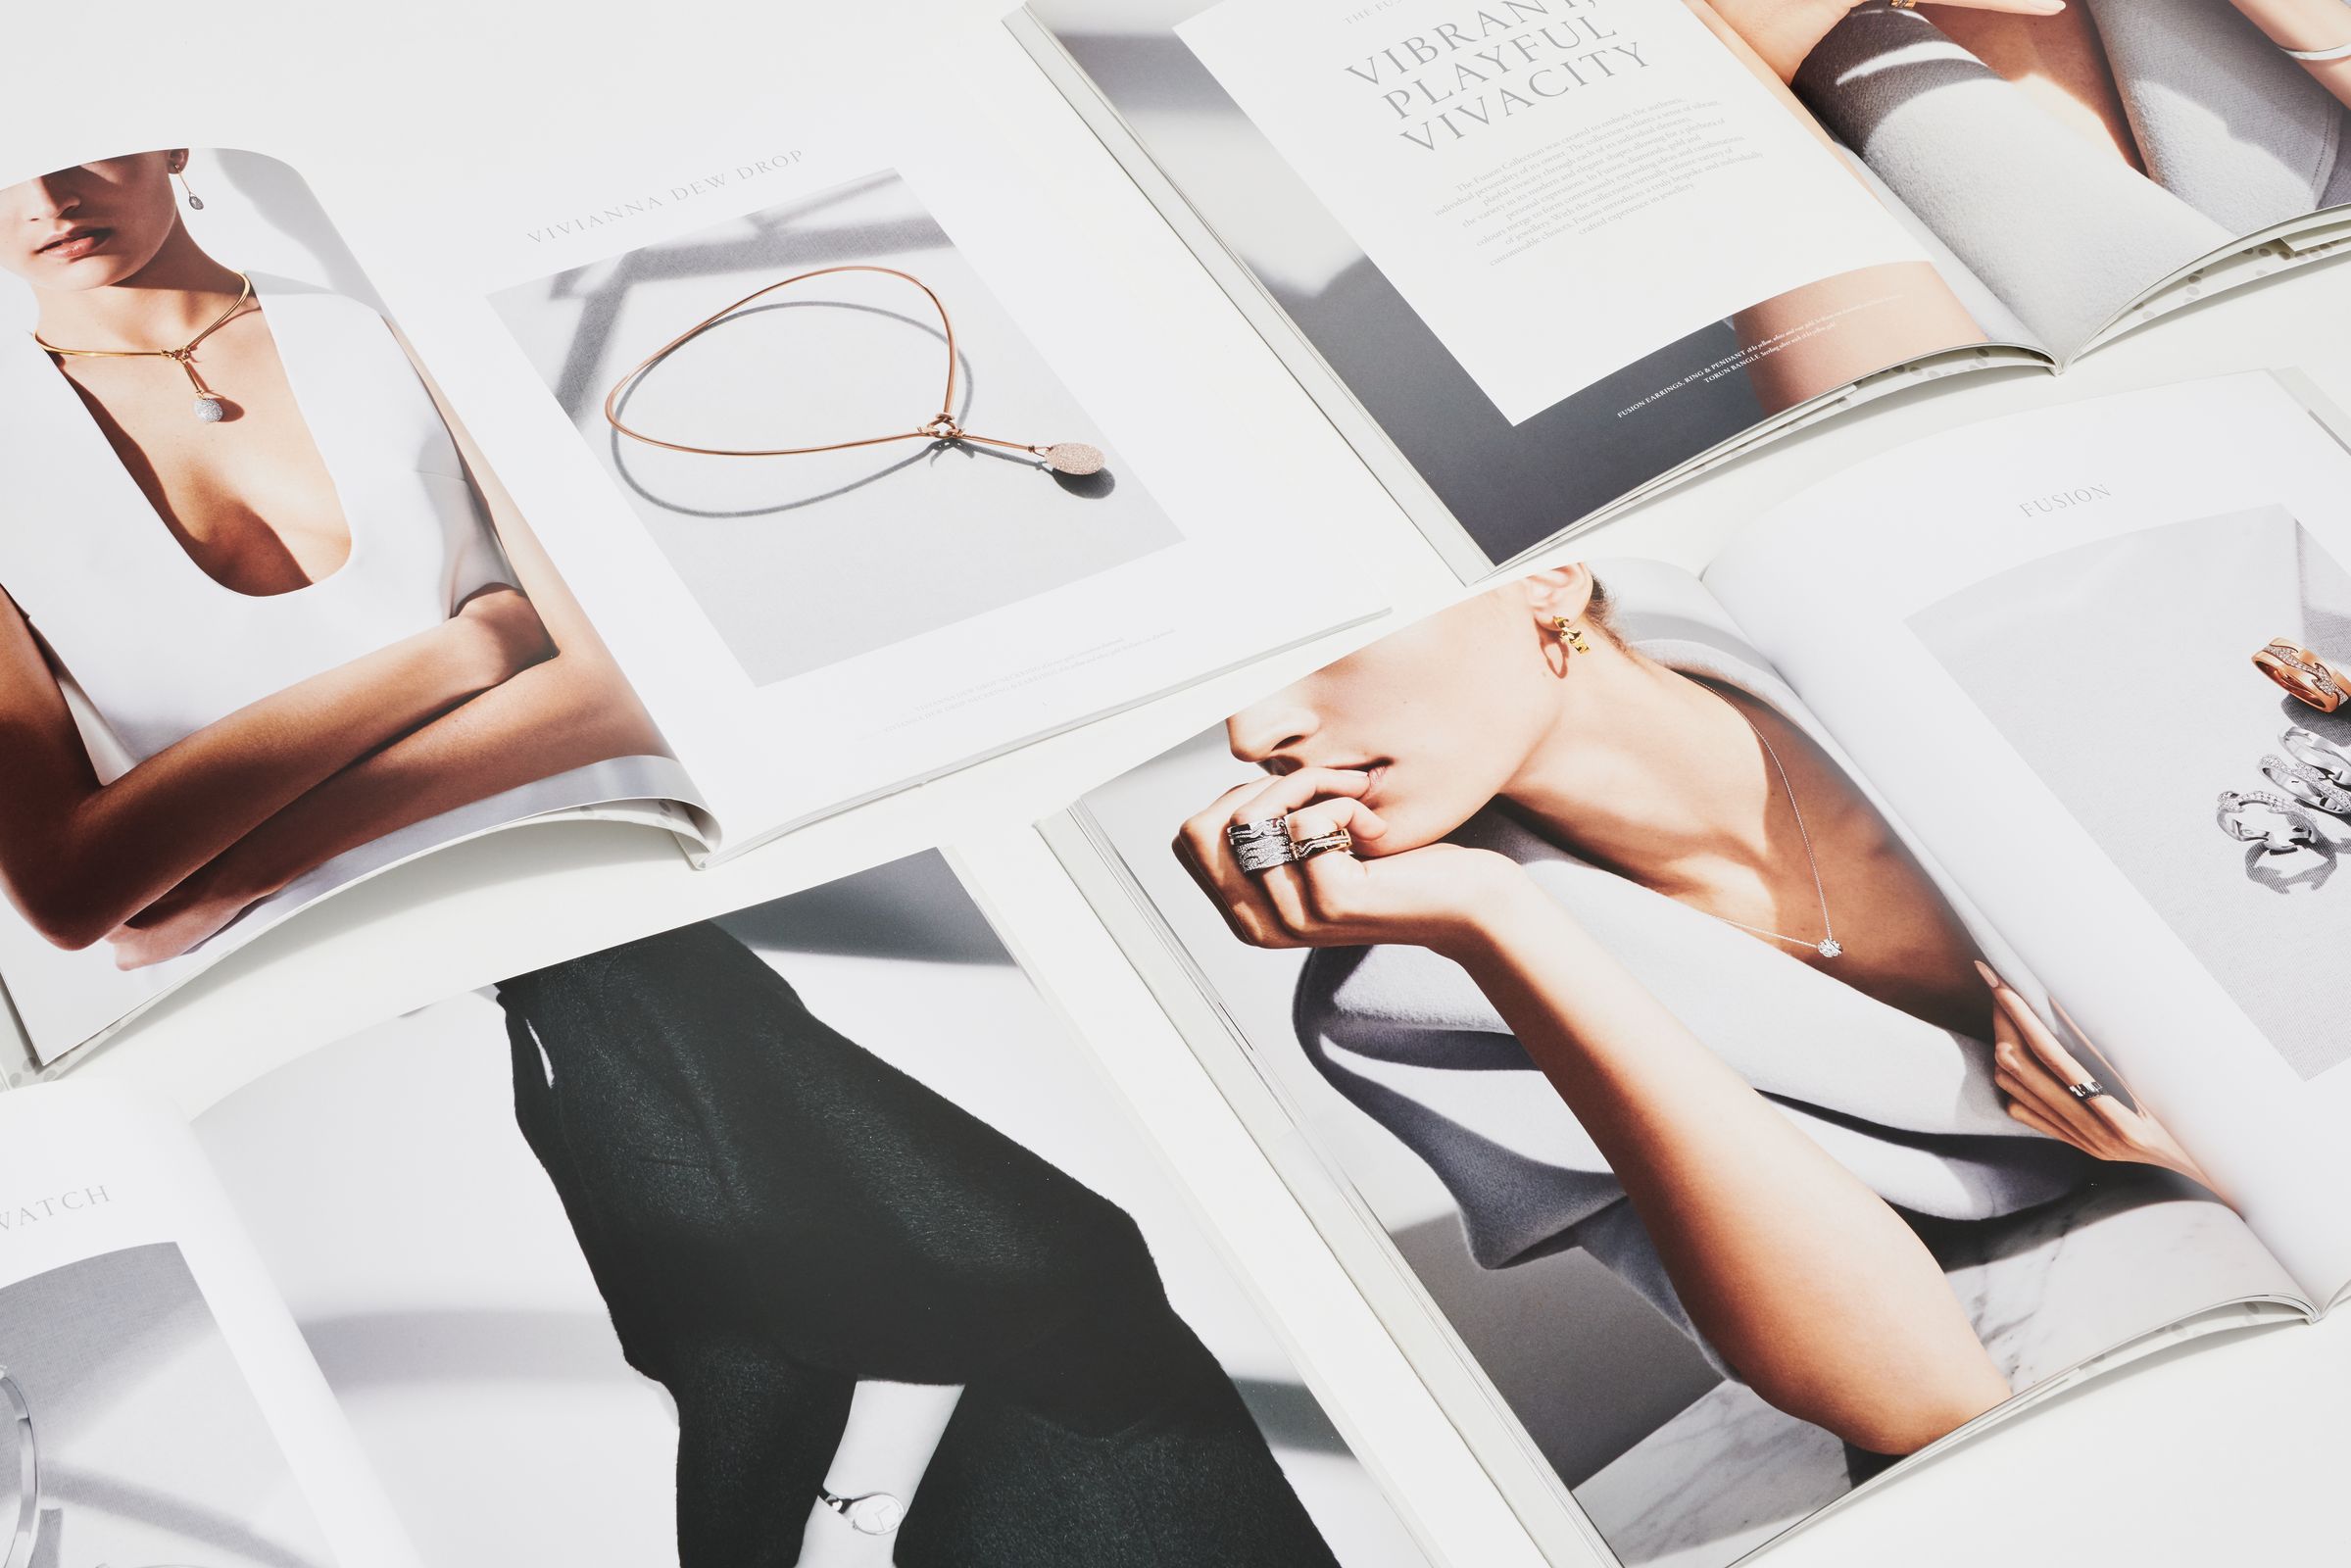 Georg Jensen catalog designs with campaign photography